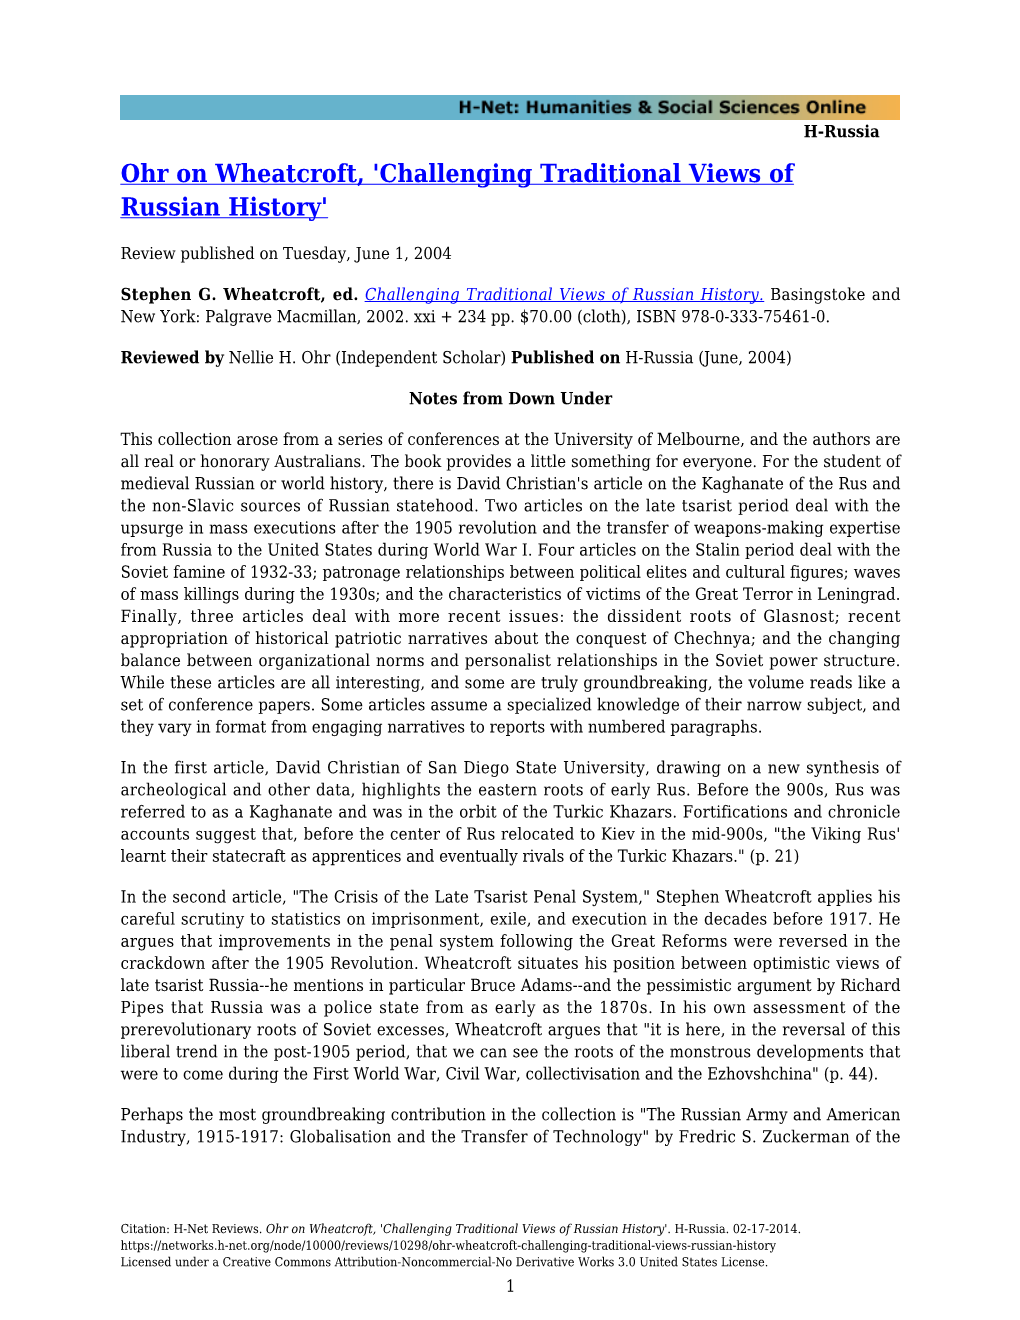 Ohr on Wheatcroft, 'Challenging Traditional Views of Russian History'